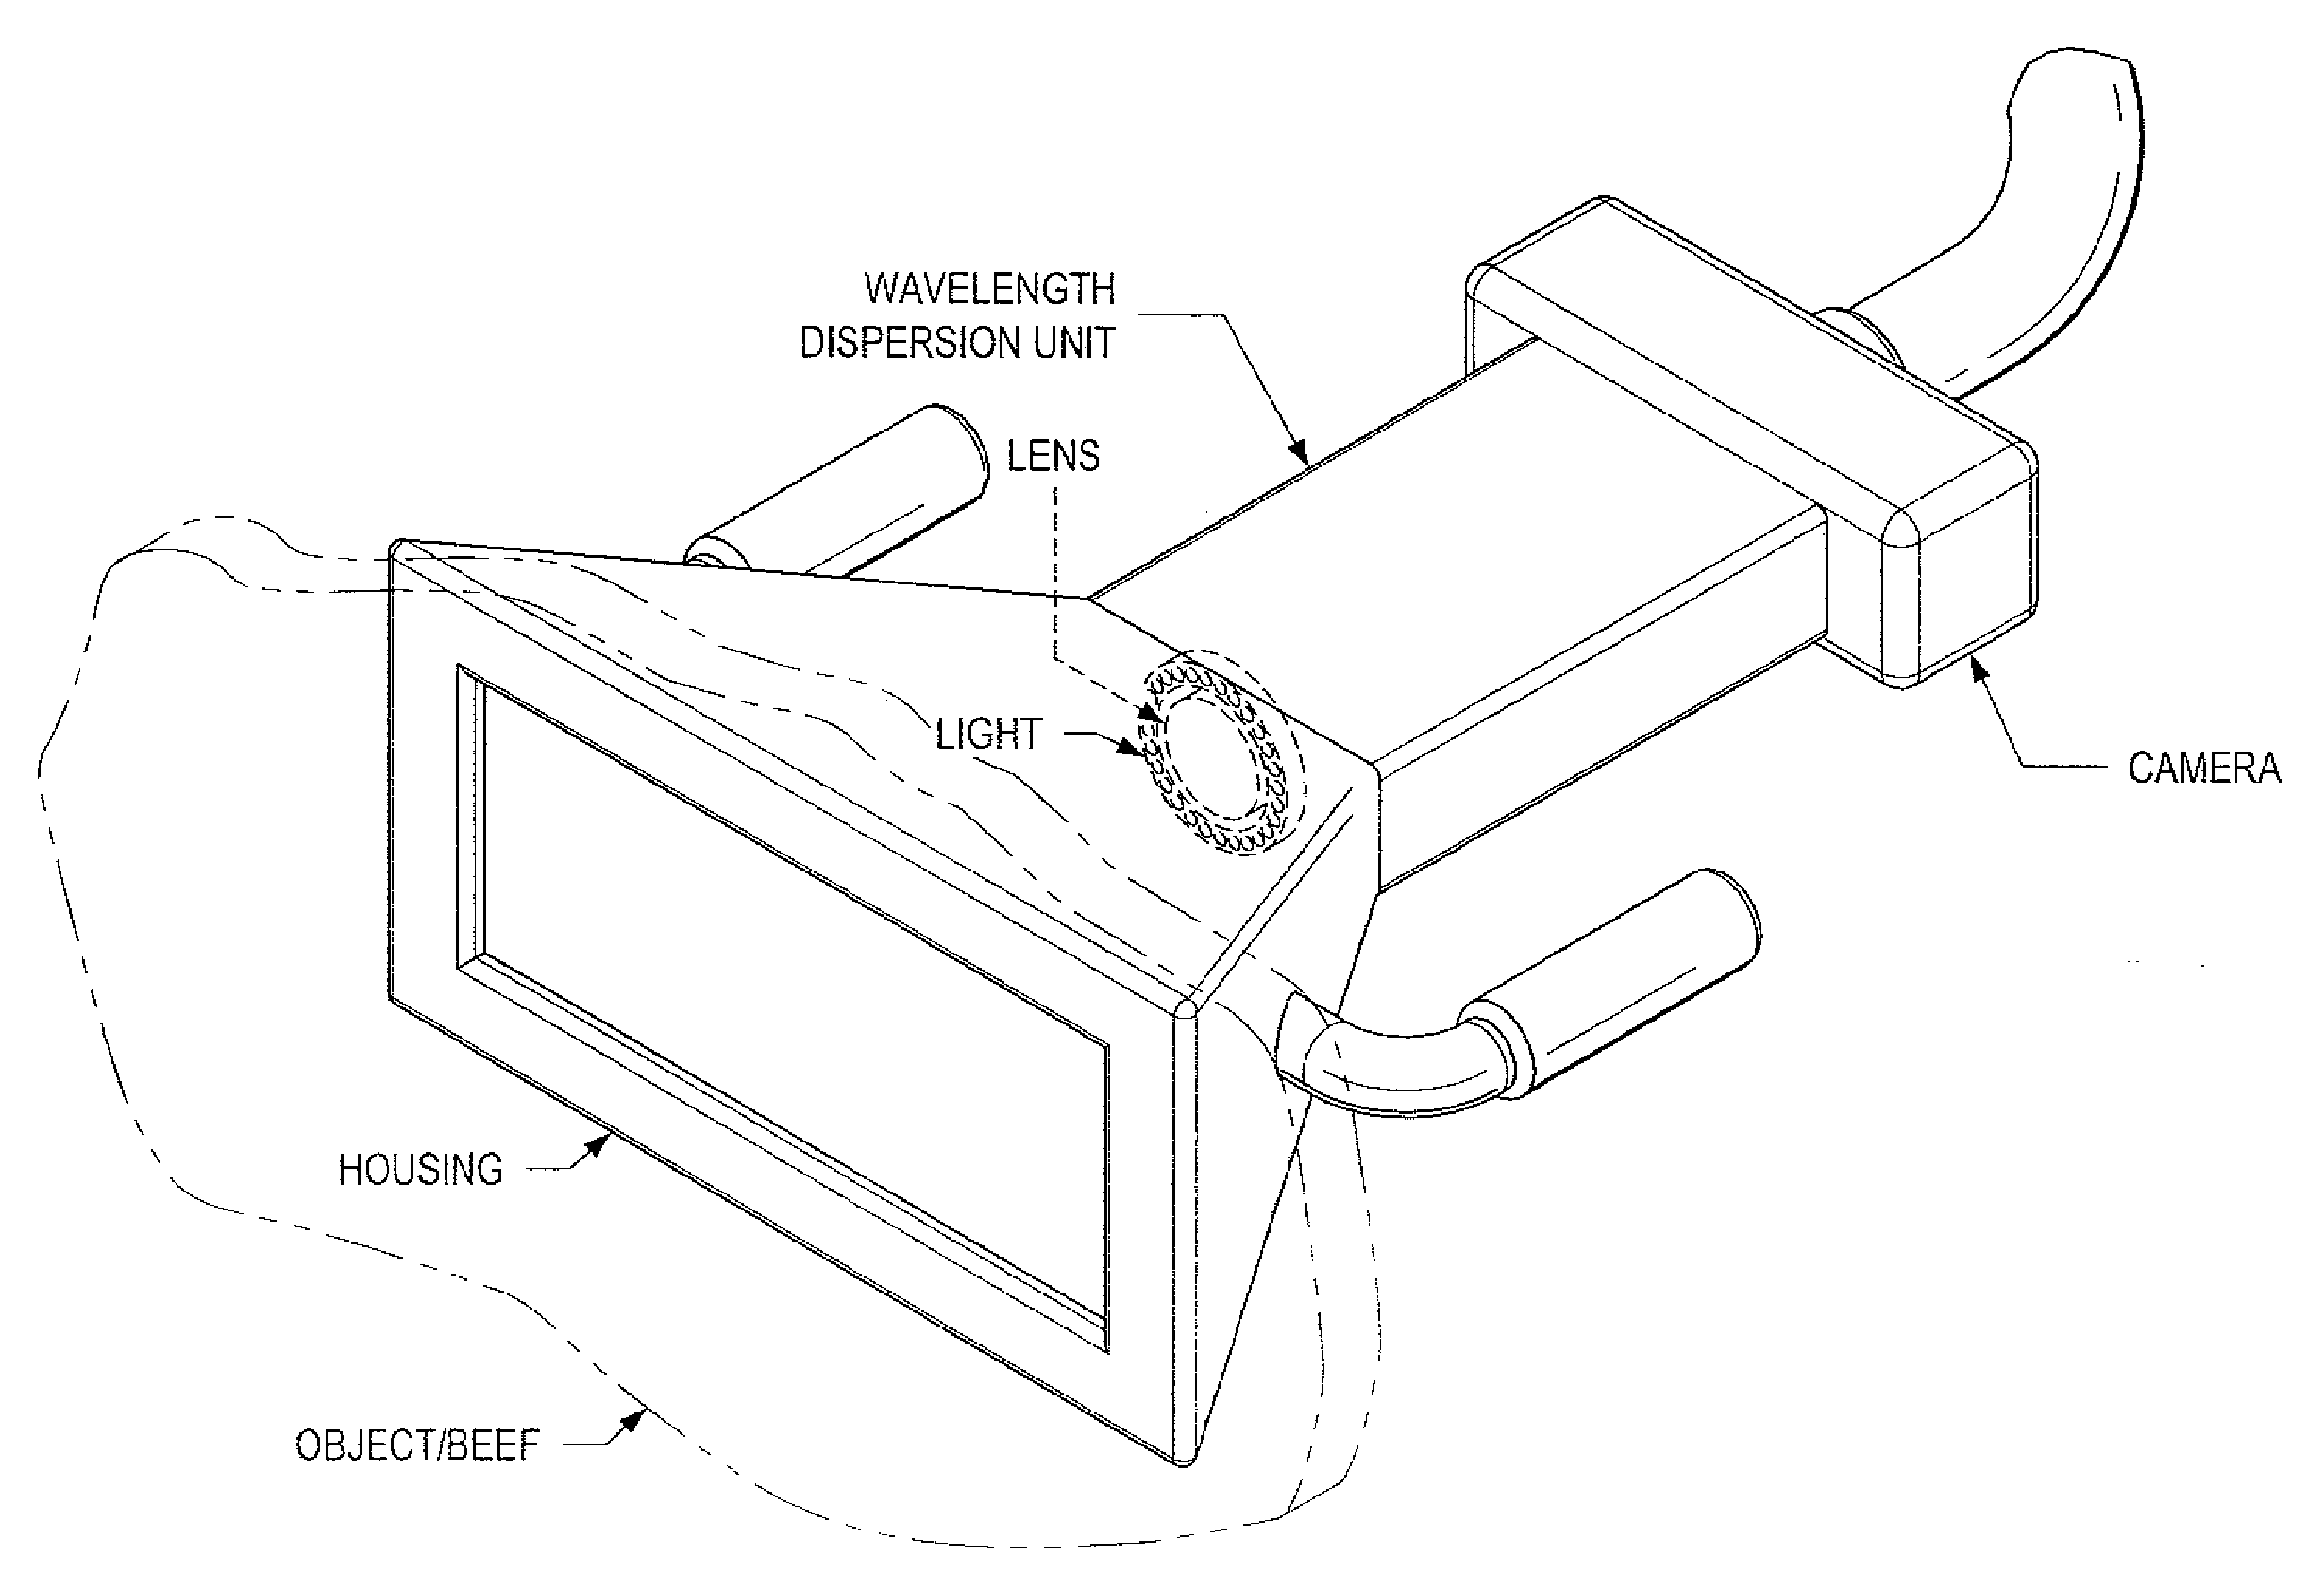 System and Method for Analyzing Properties of Meat Using Multispectral Imaging